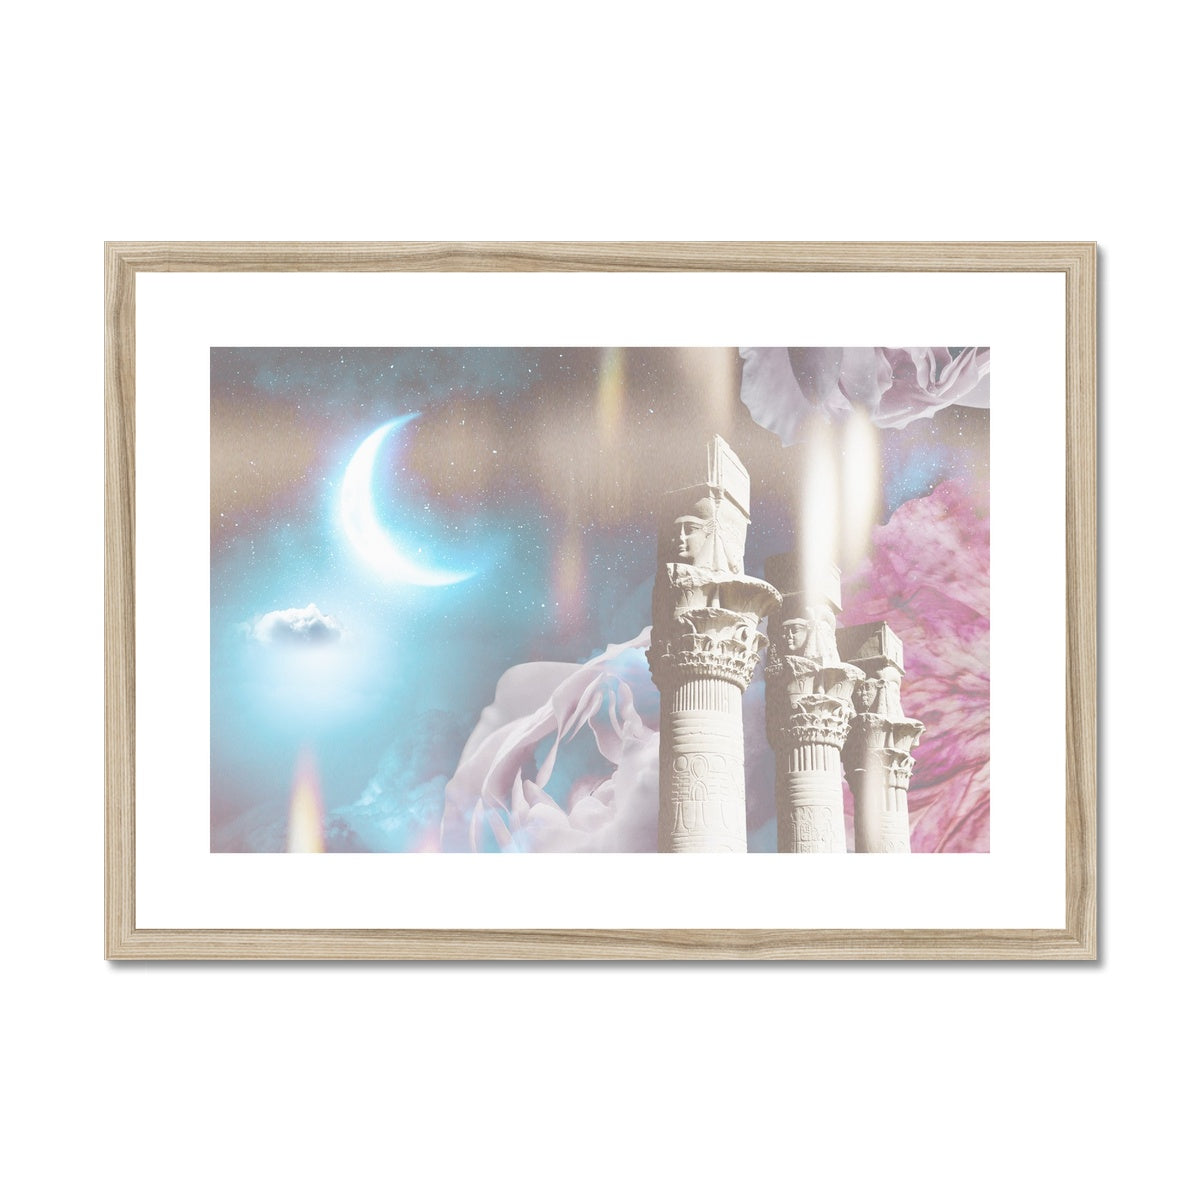 Ancient Temple of Light Framed & Mounted Print - Starseed Designs Inc.